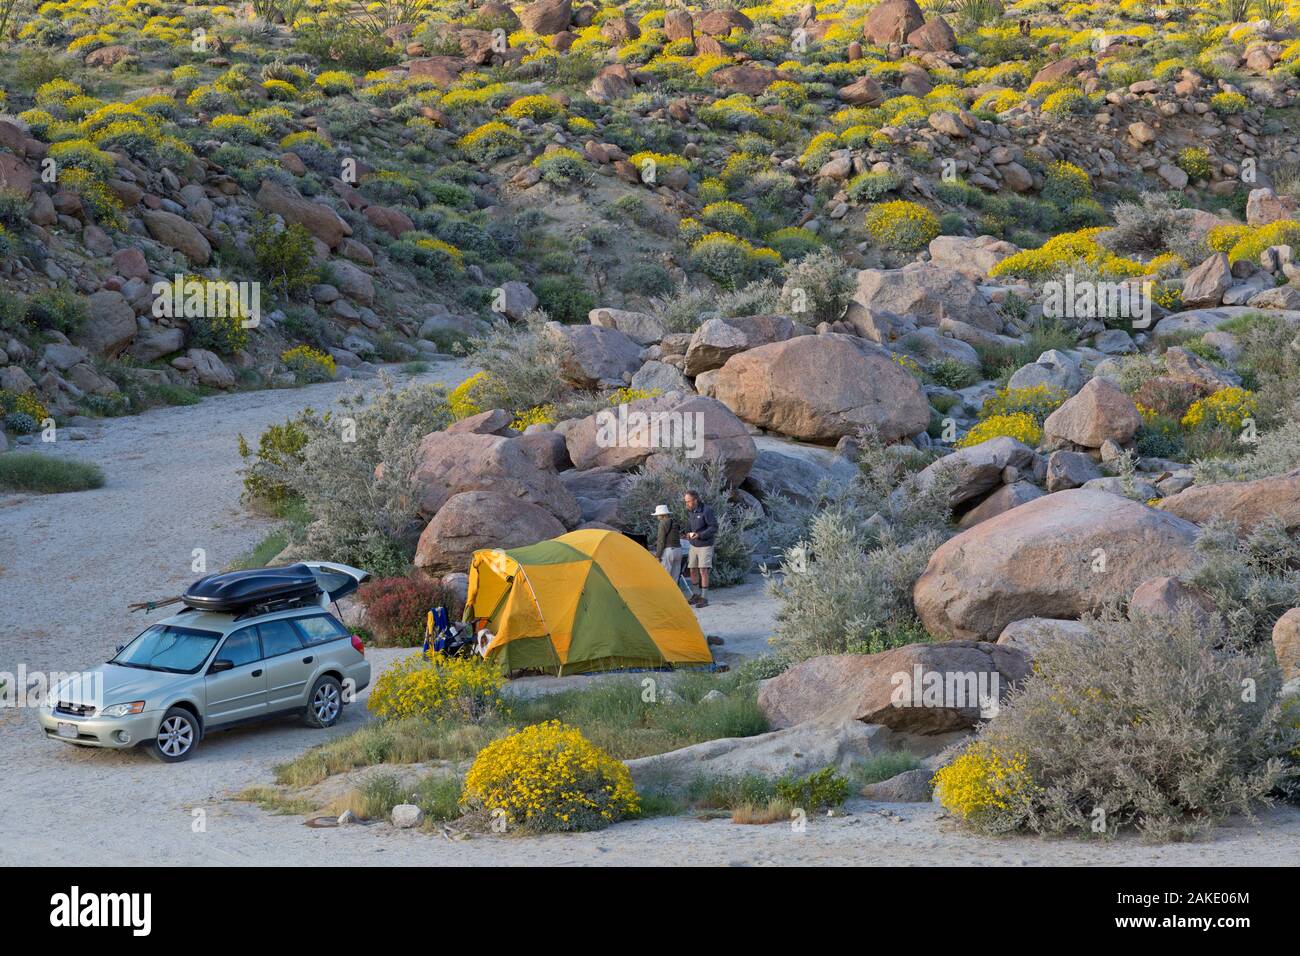 Couple car camping in during spring flower bloom Glorietta Canyon, Anza Borrego State Park, California Stock Photo